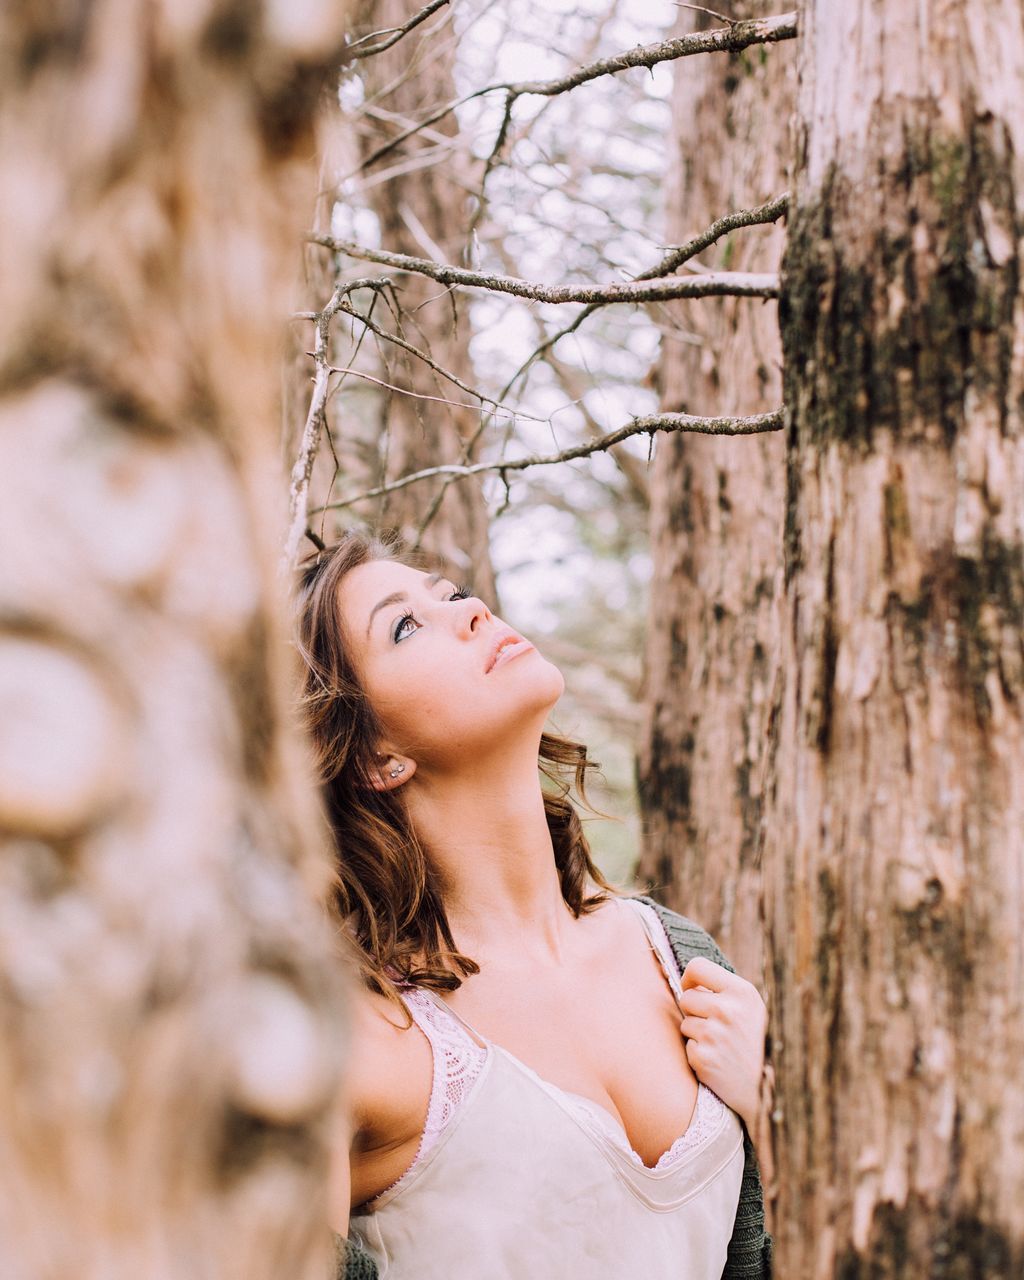 lifestyles, tree, focus on foreground, tree trunk, holding, young adult, young women, leisure activity, person, front view, close-up, day, portrait, waist up, headshot